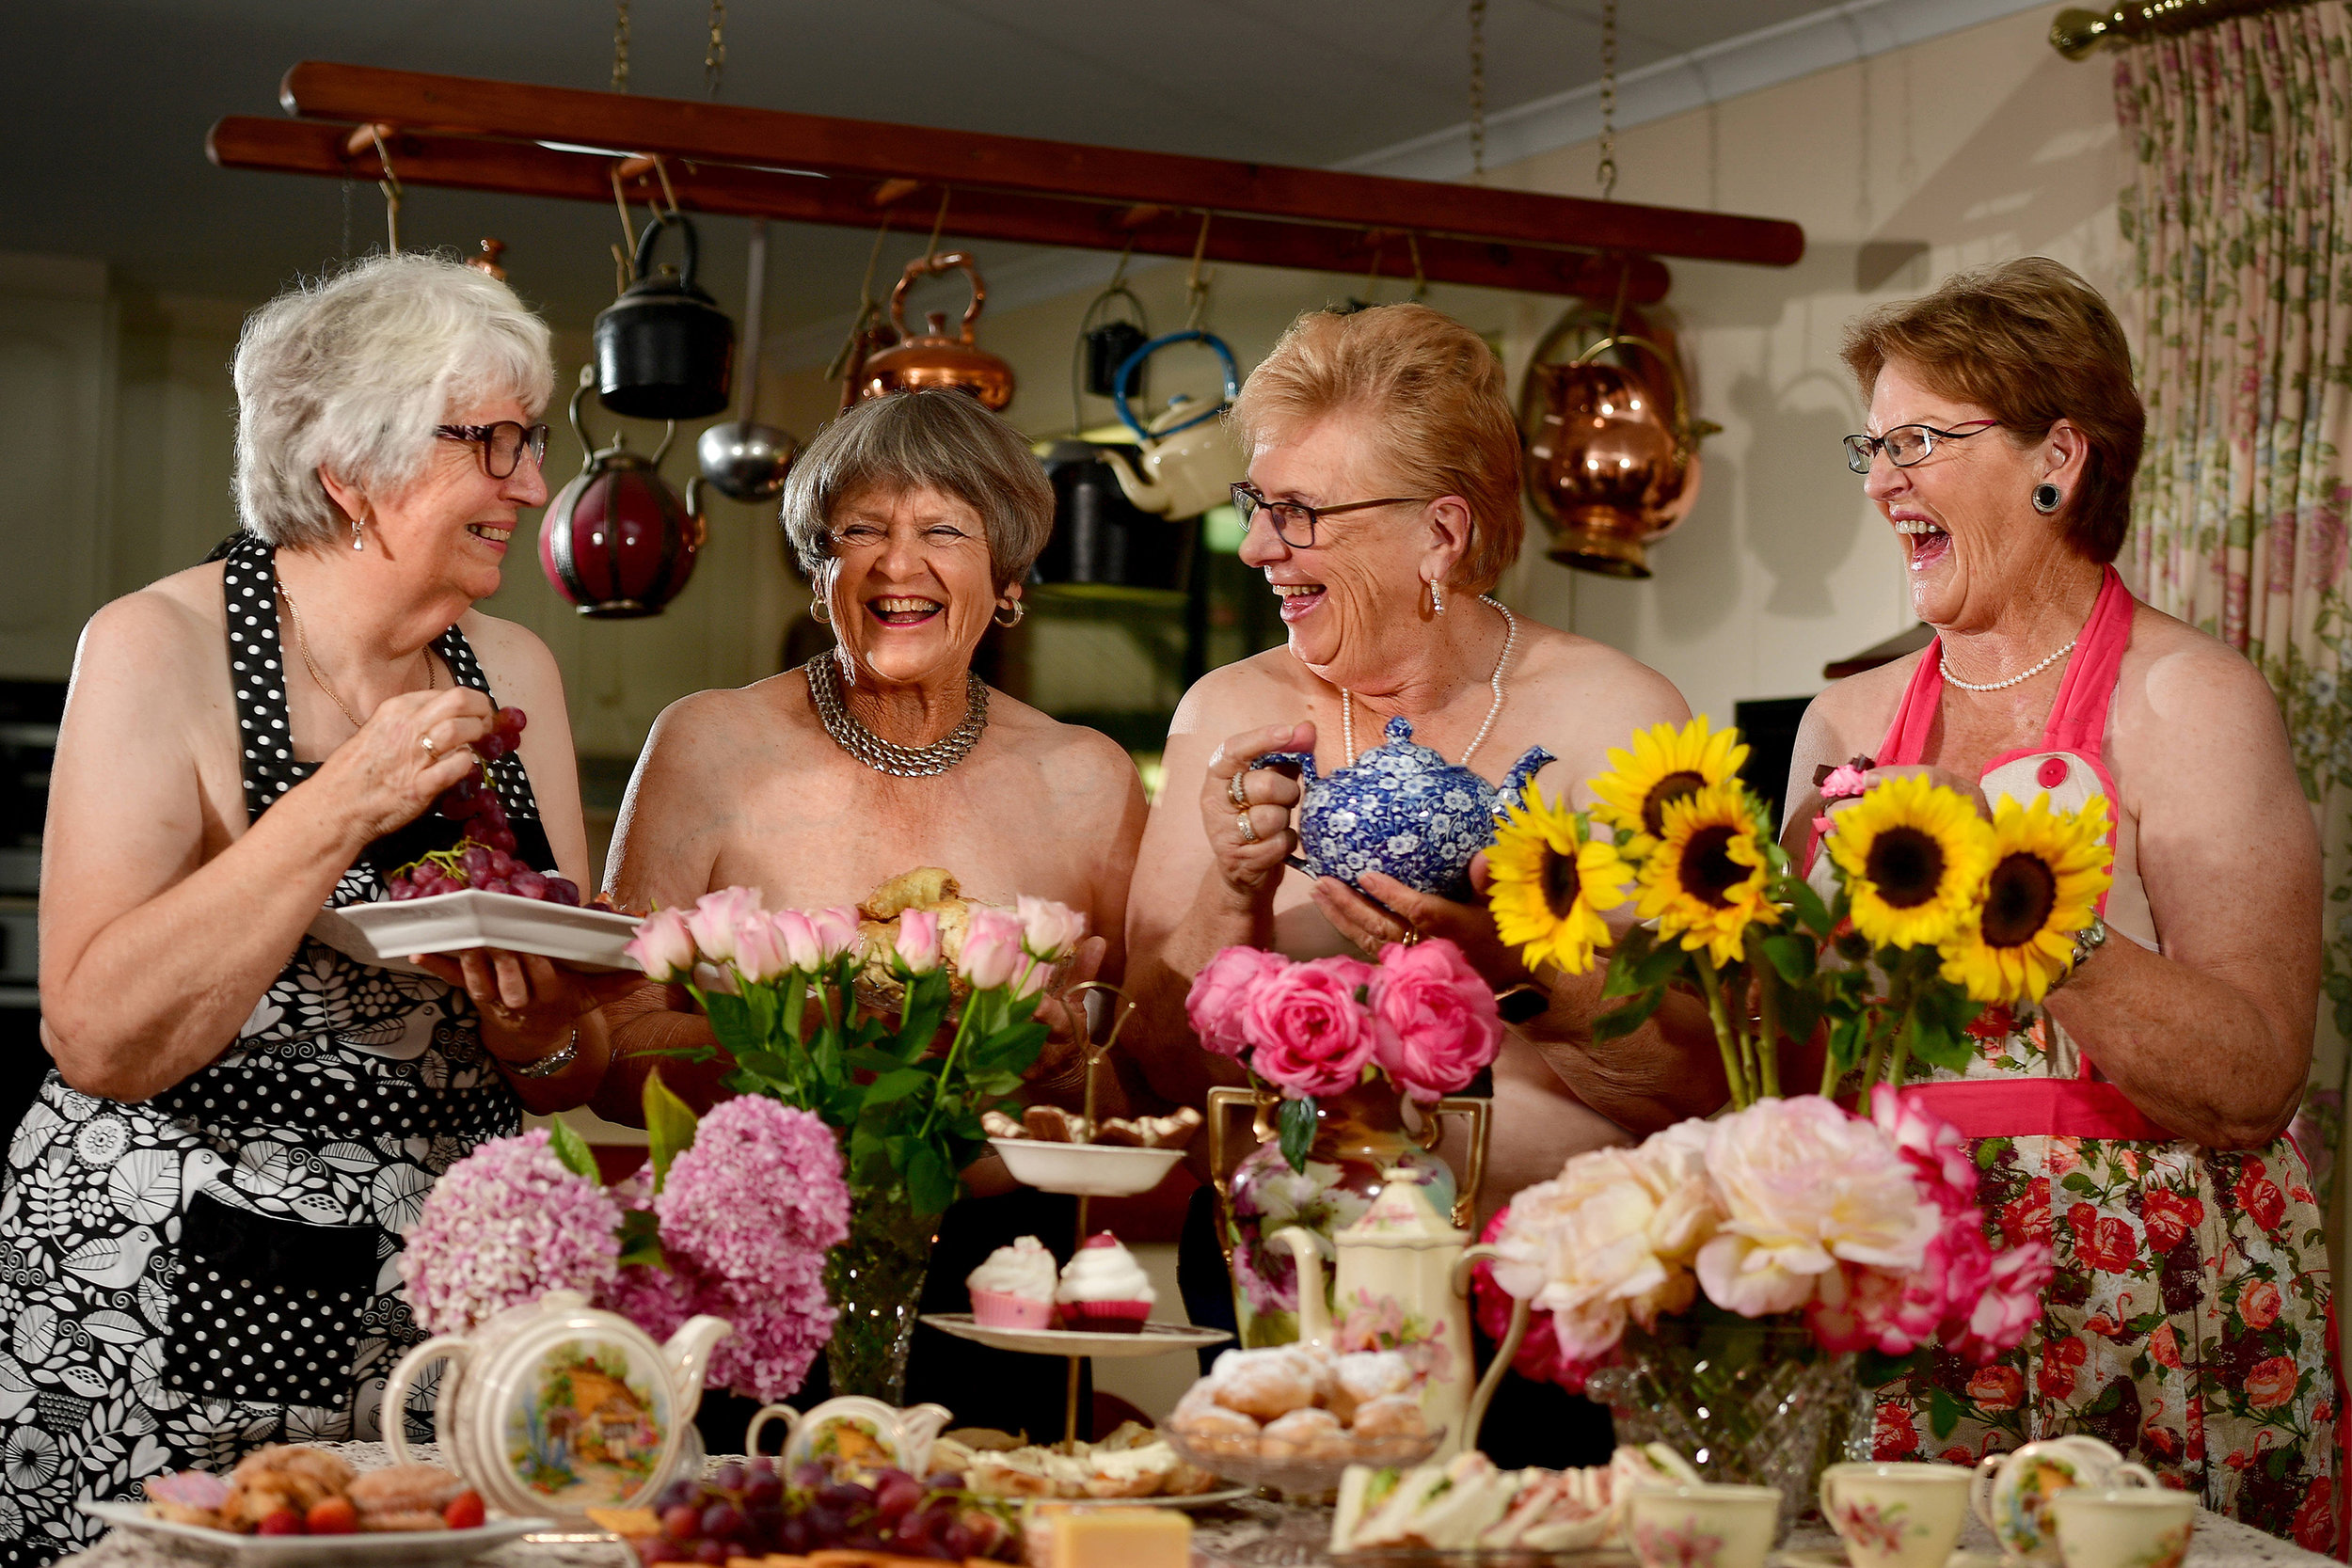  24.4.18 - Eileen Seyd, Helen Randall, Cathy Megson-McAllister &amp; Pam McDonald undress to enjoy morning tea and raise money for the Cancer Council. The ladies are part of 'Macclesfield Young at Hearts Club' who for the past 10 years have come toge